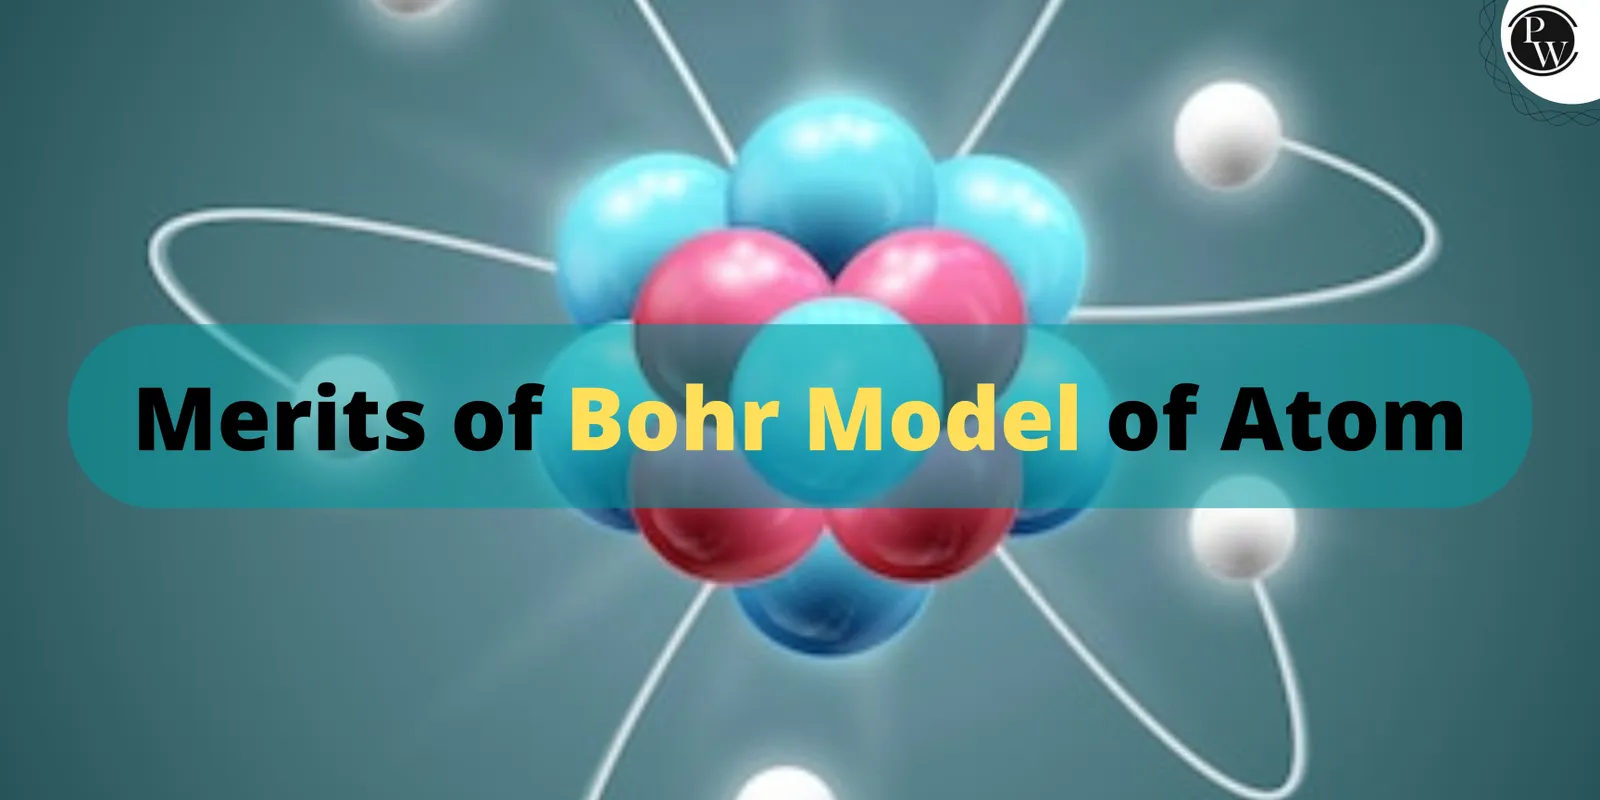 WRITE THE MERITS OF BOHR’S THEORY